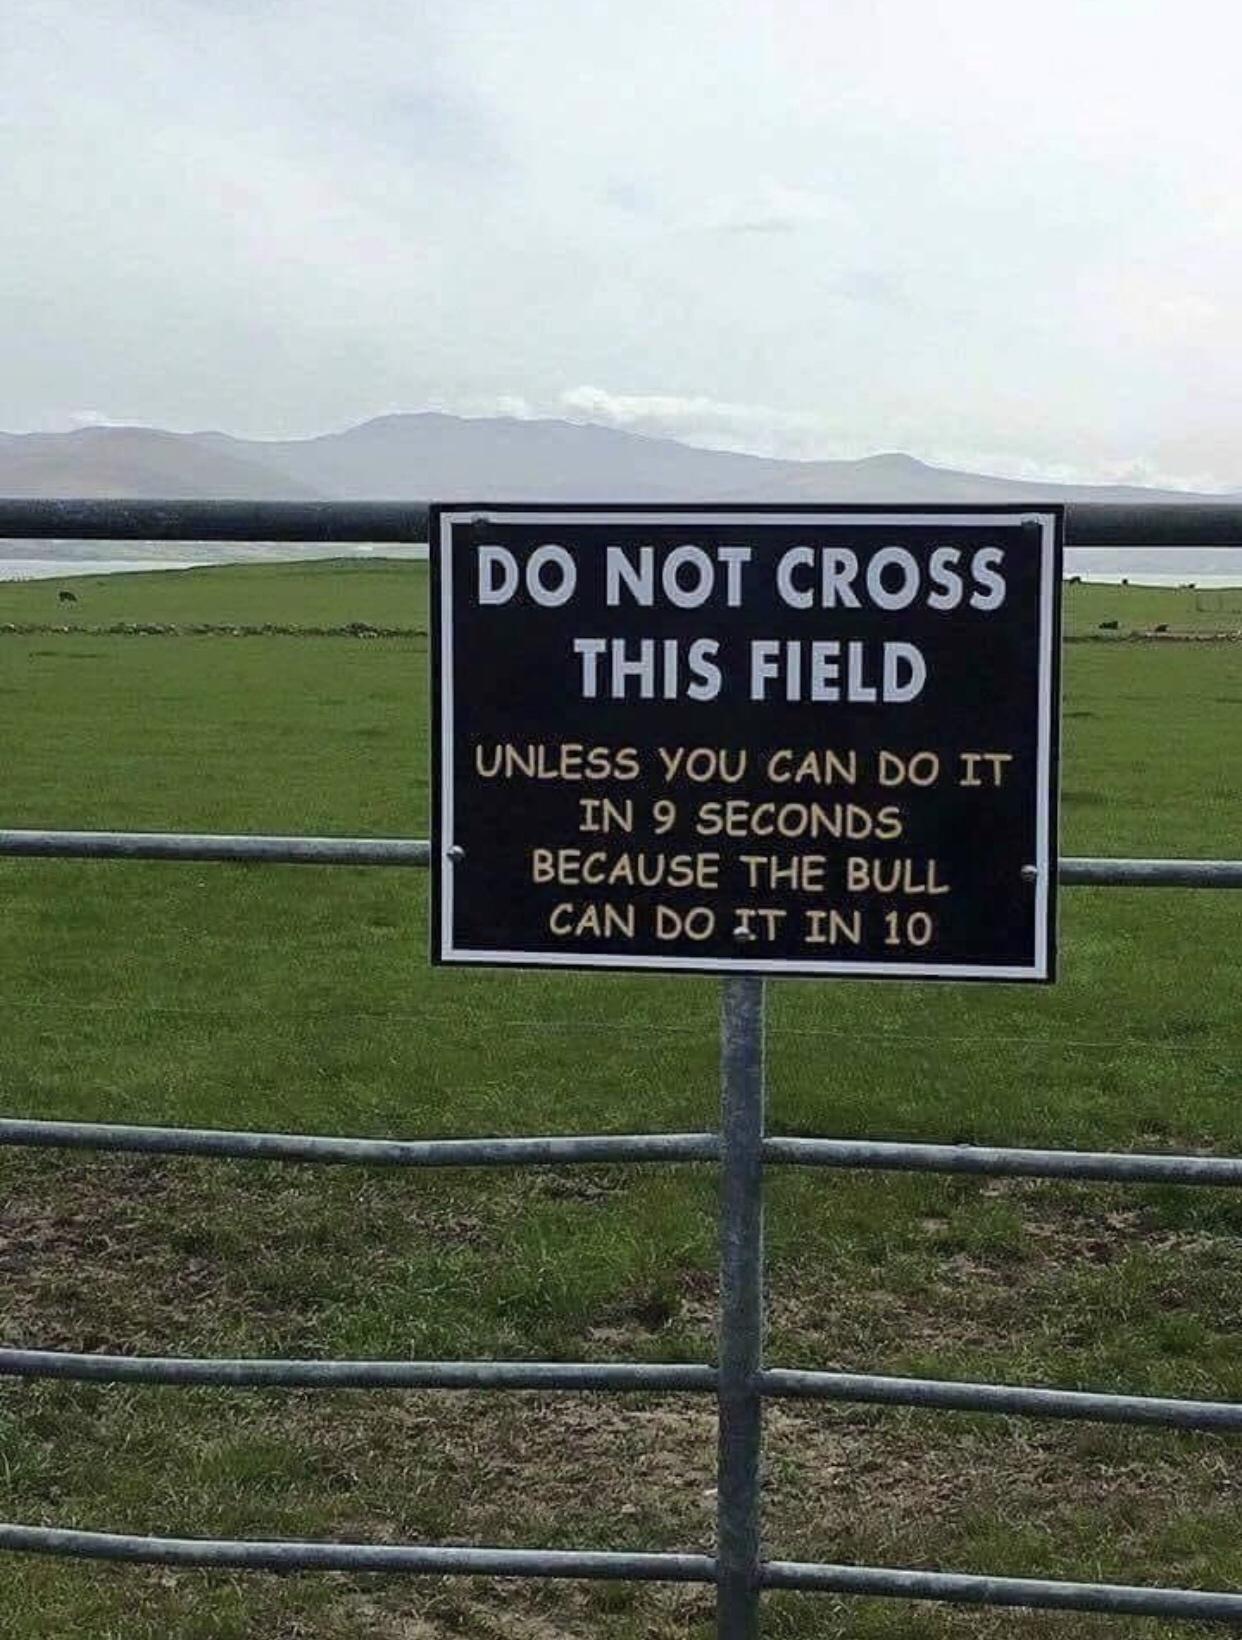 florida man bull meme - Do Not Cross This Field Unless You Can Do It In 9 Seconds Because The Bull Can Do It In 10